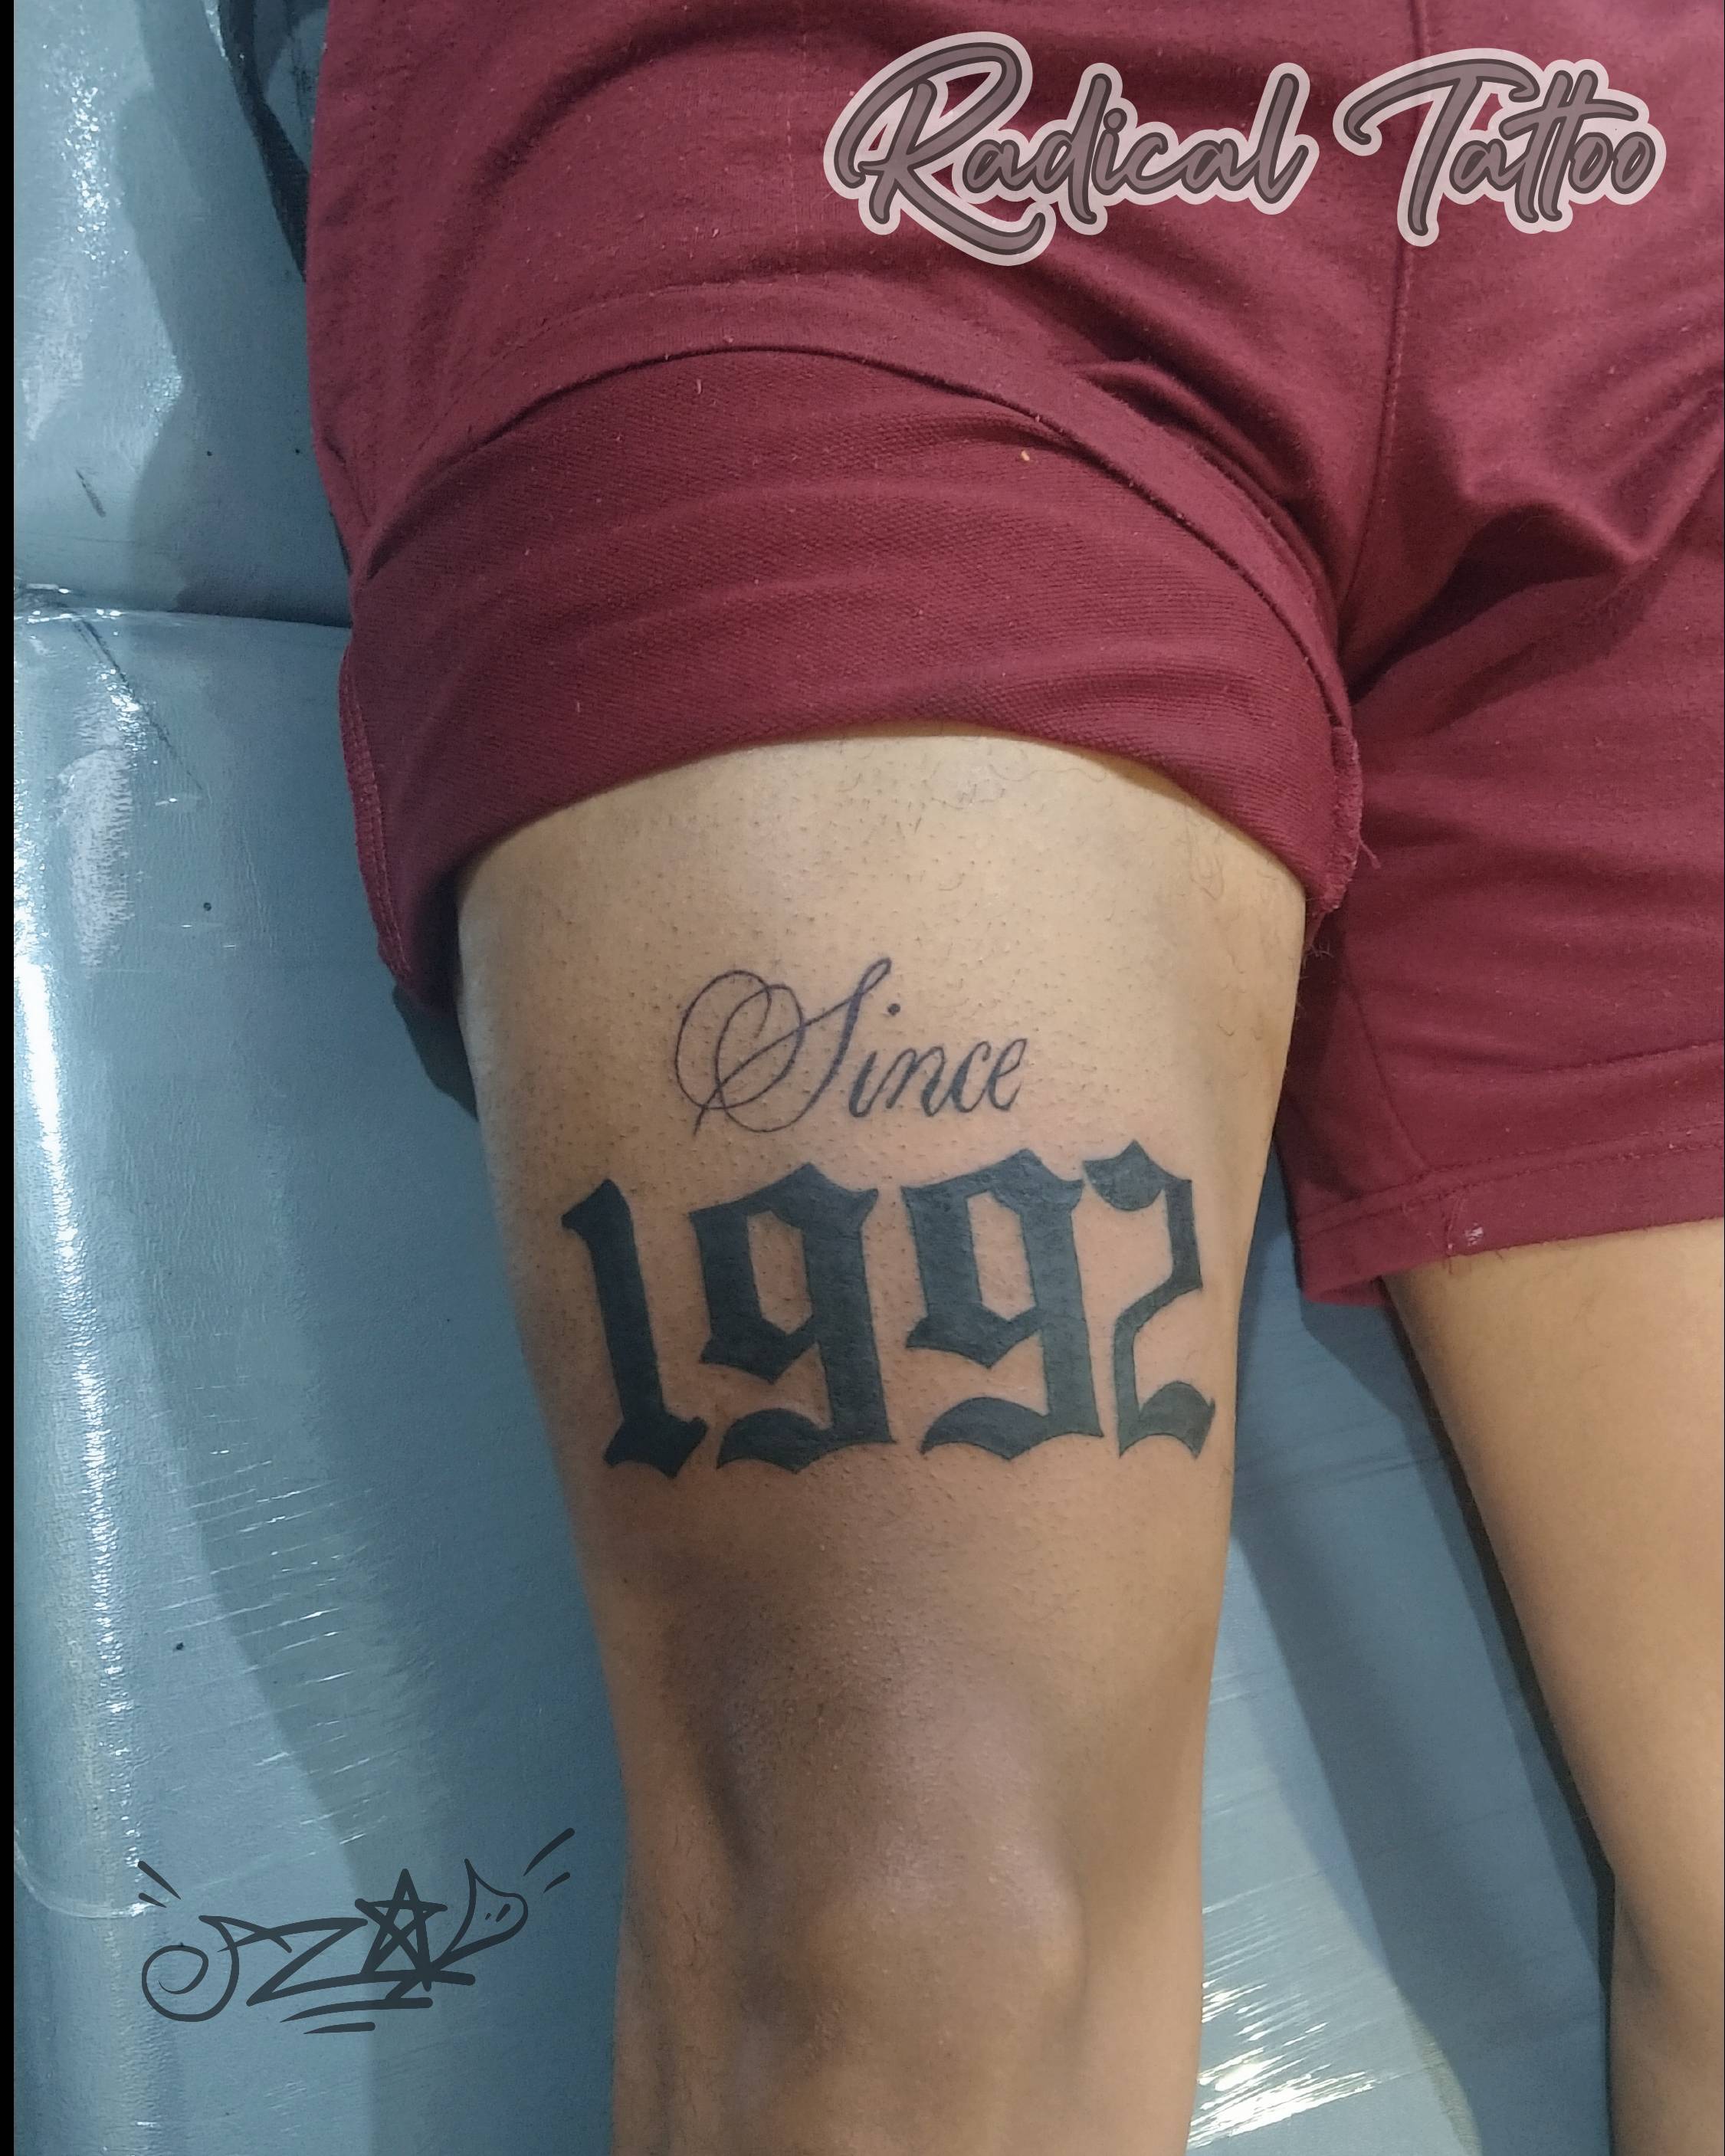 Find inspiration in the year of birth with 1992 tattoo design ideas